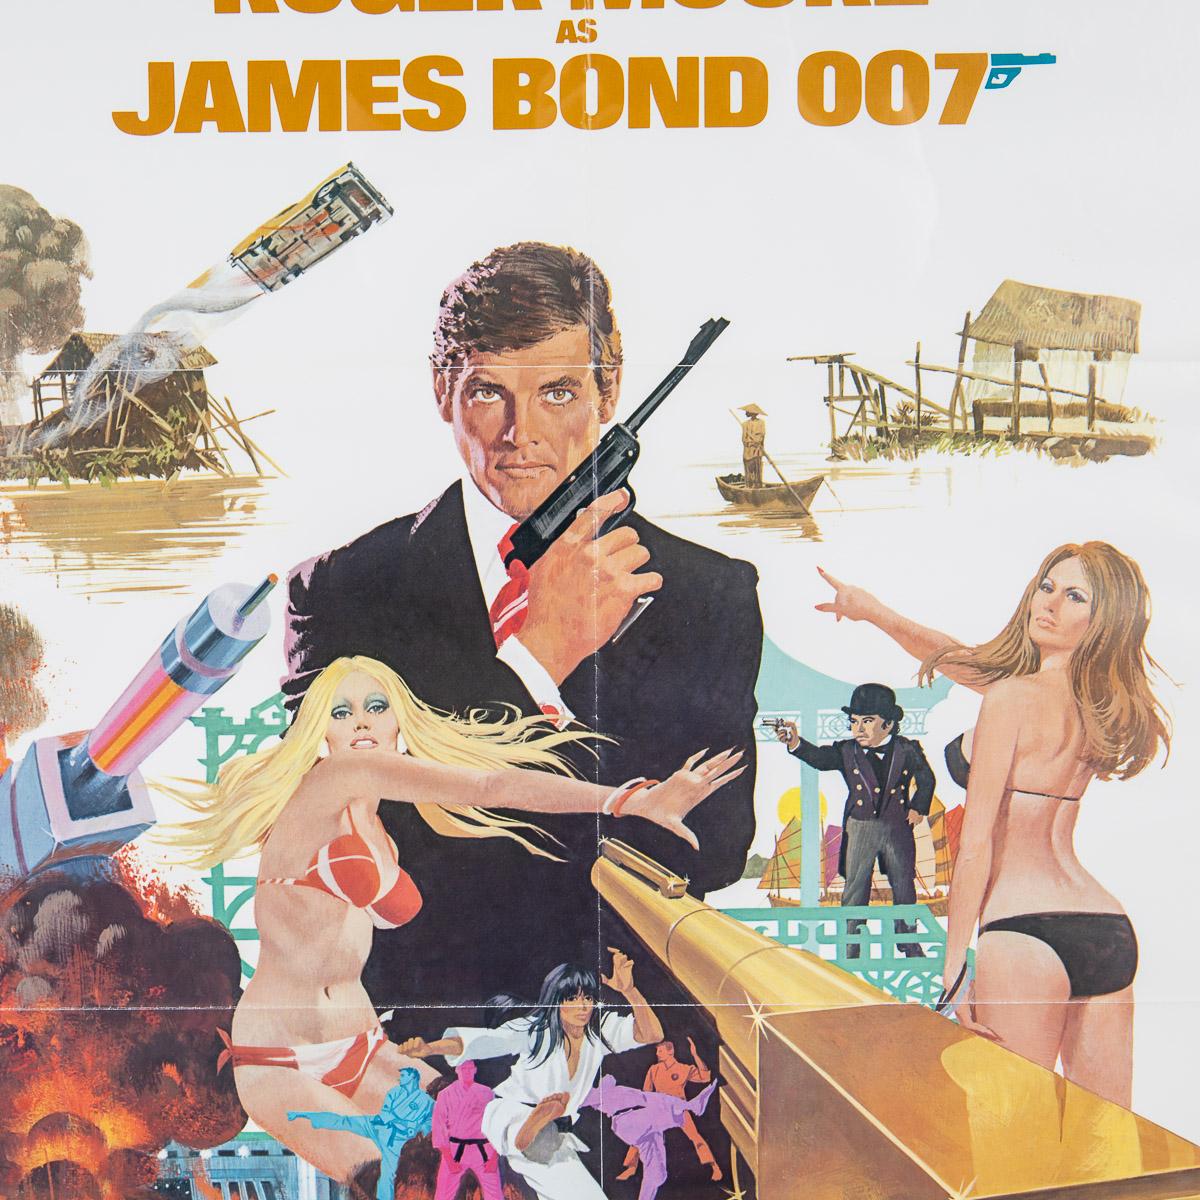 A very rare and original American (U.S) release poster from the 1974 'Man With The Golden Gun'. This was the ninth film in the series produced by Eon Productions. It was the second time that Roger Moore played James Bond, and the fourth and final